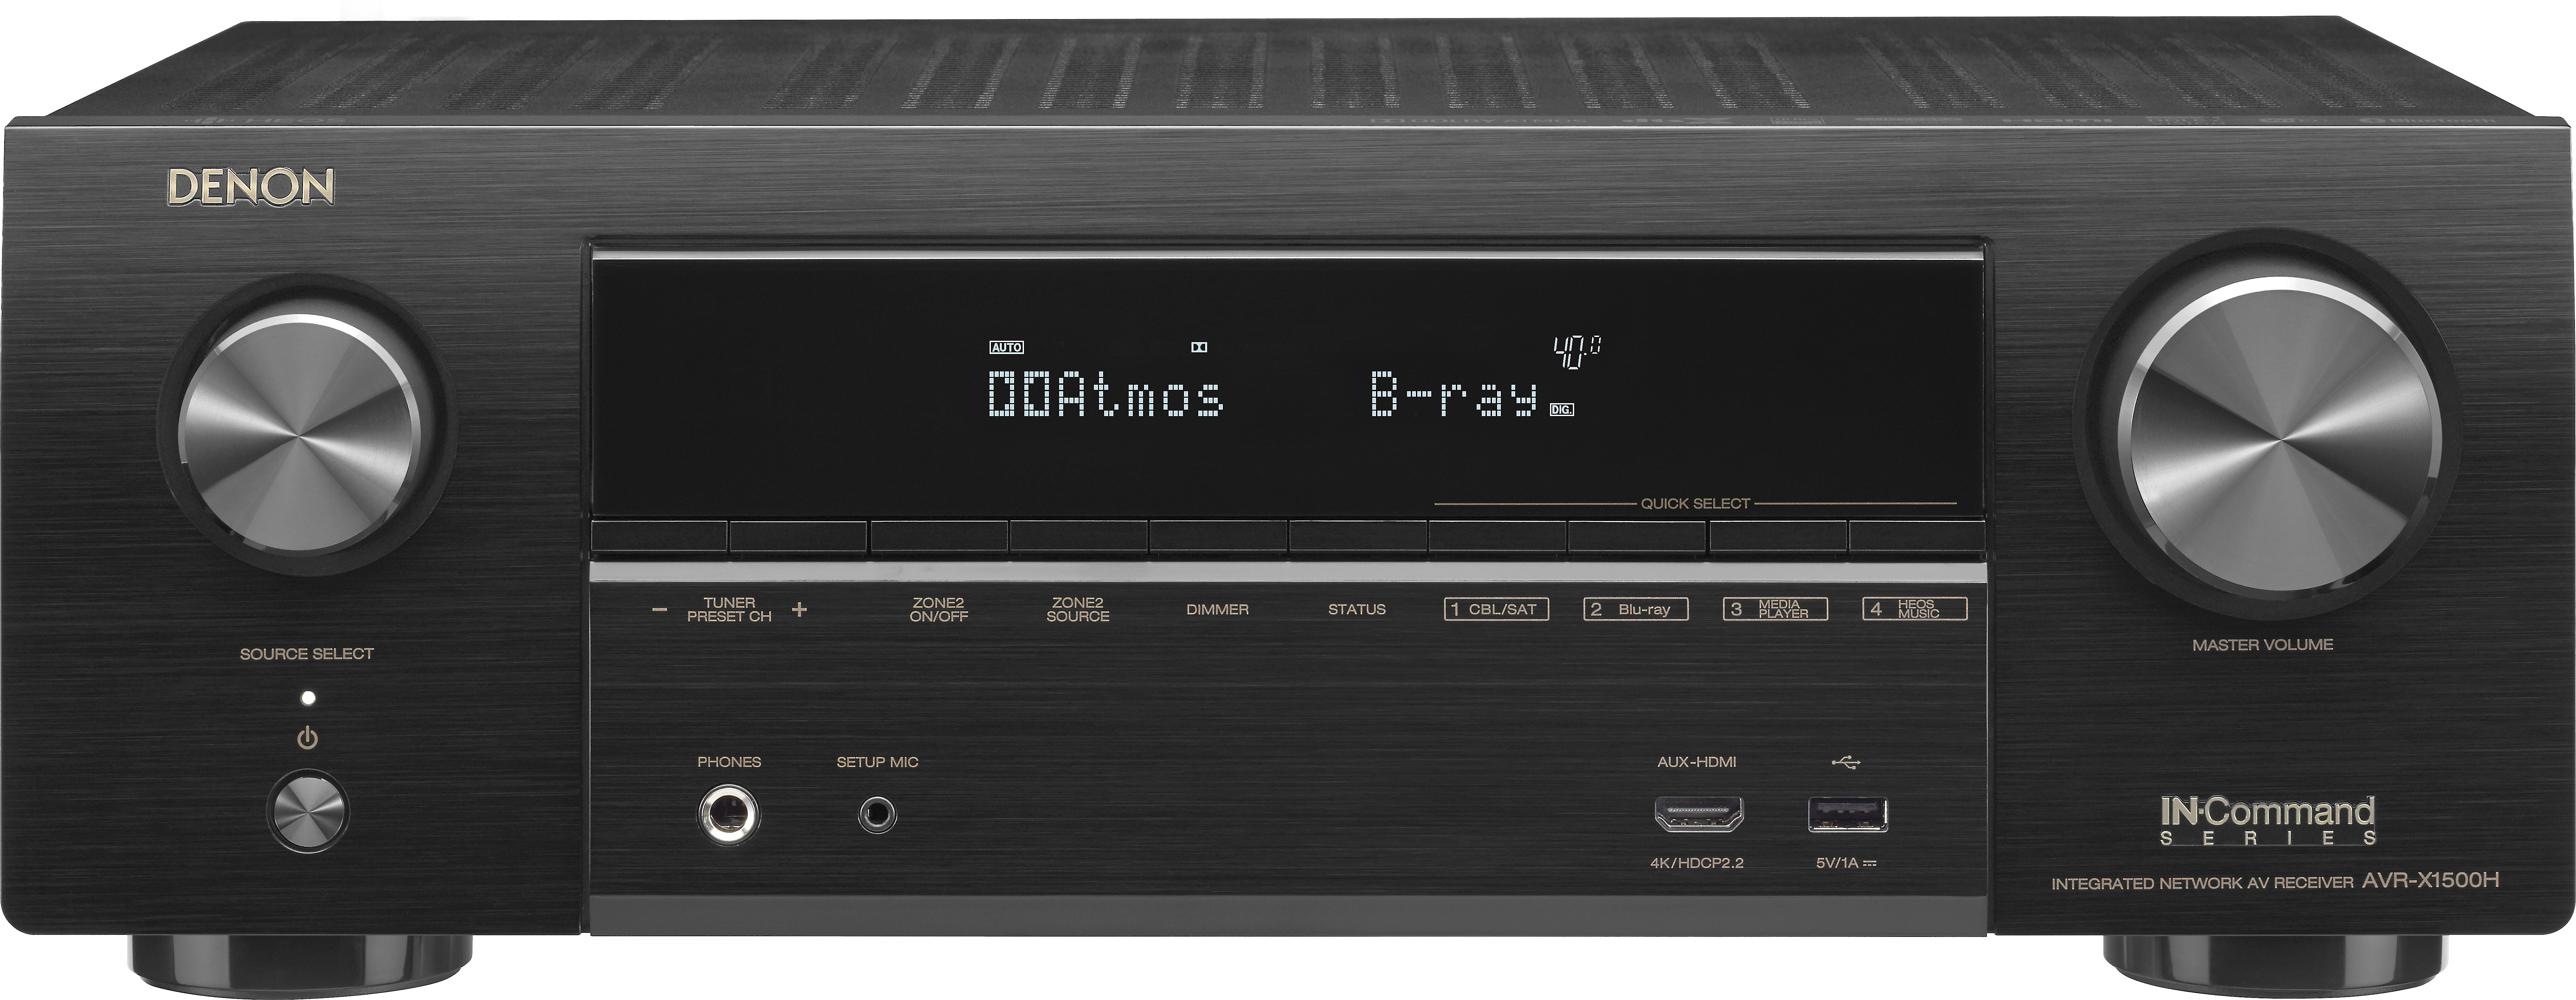 Customer Reviews: Denon AVR-X1500H 7.2-channel home theater 